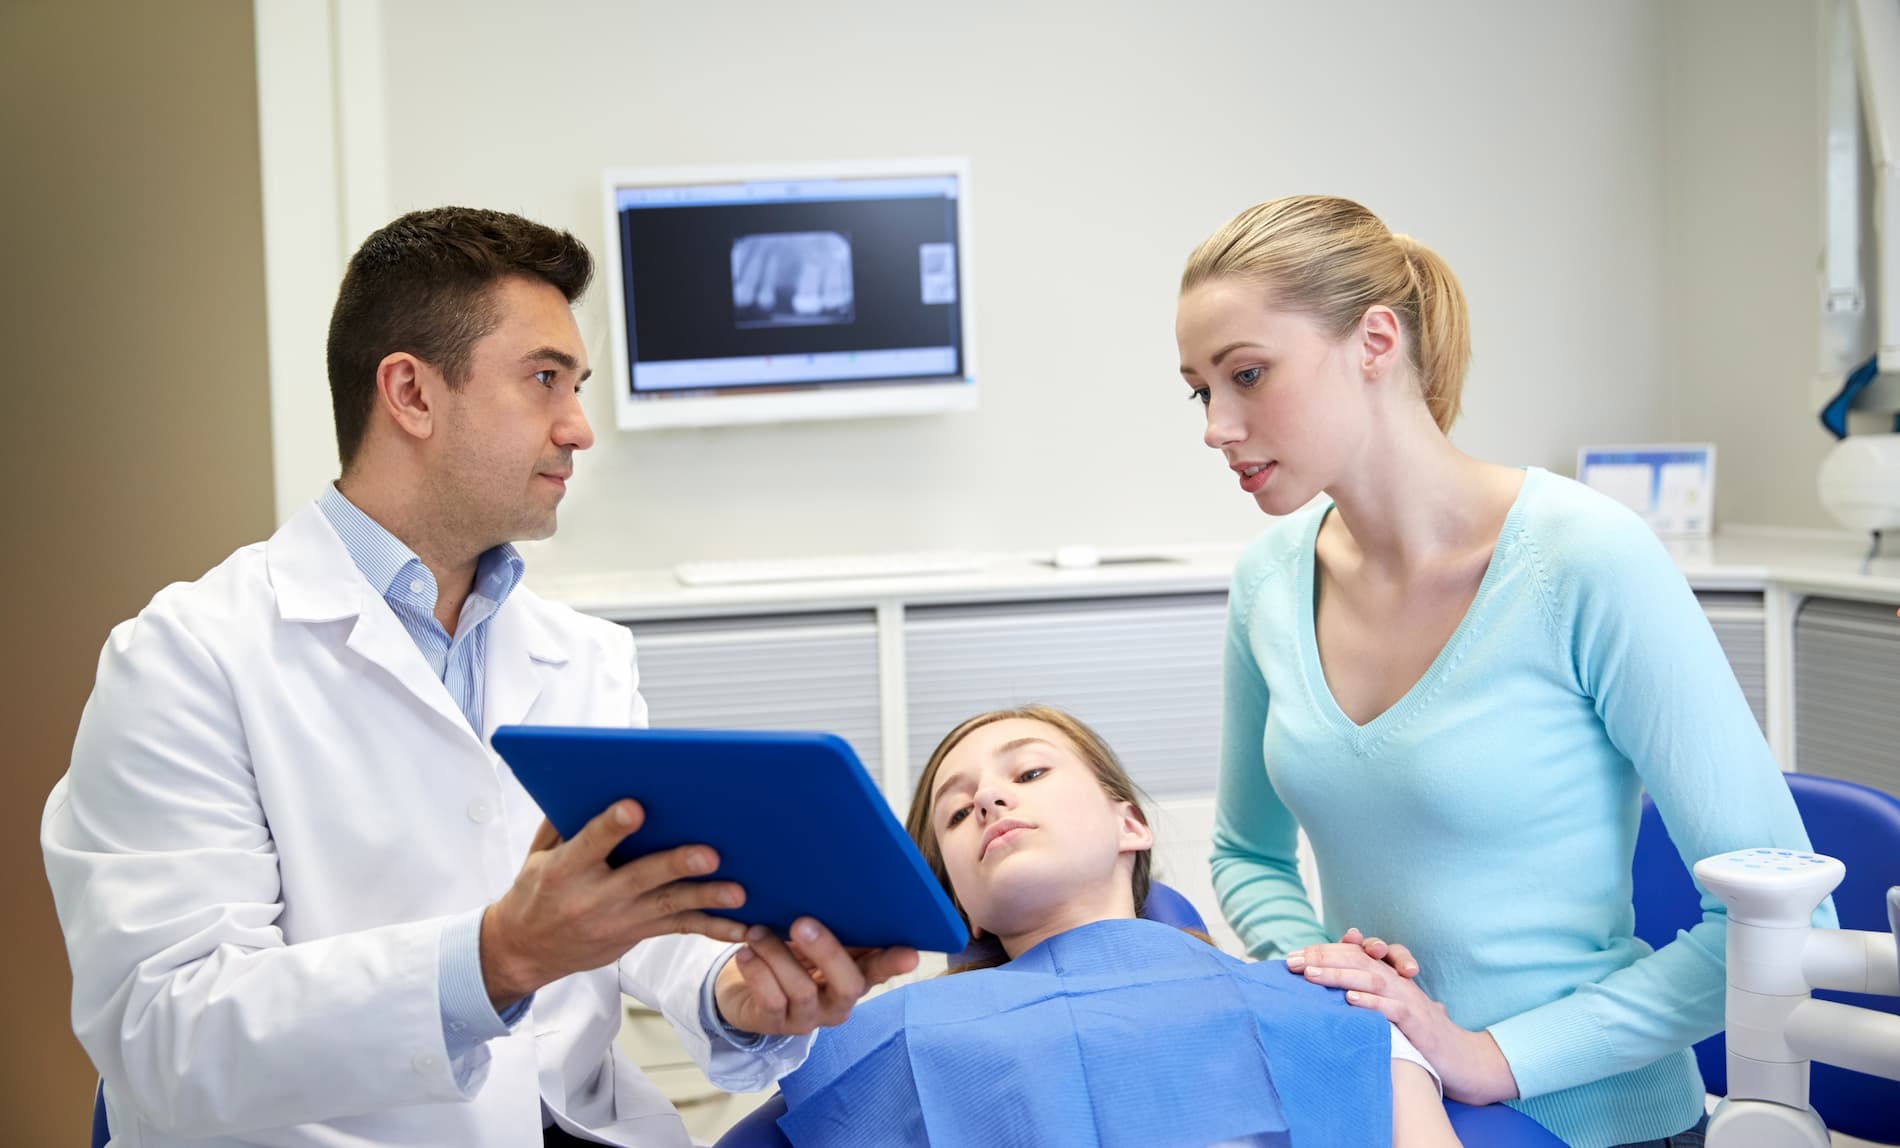 Best HIPAA Compliance For Your Dental Practice